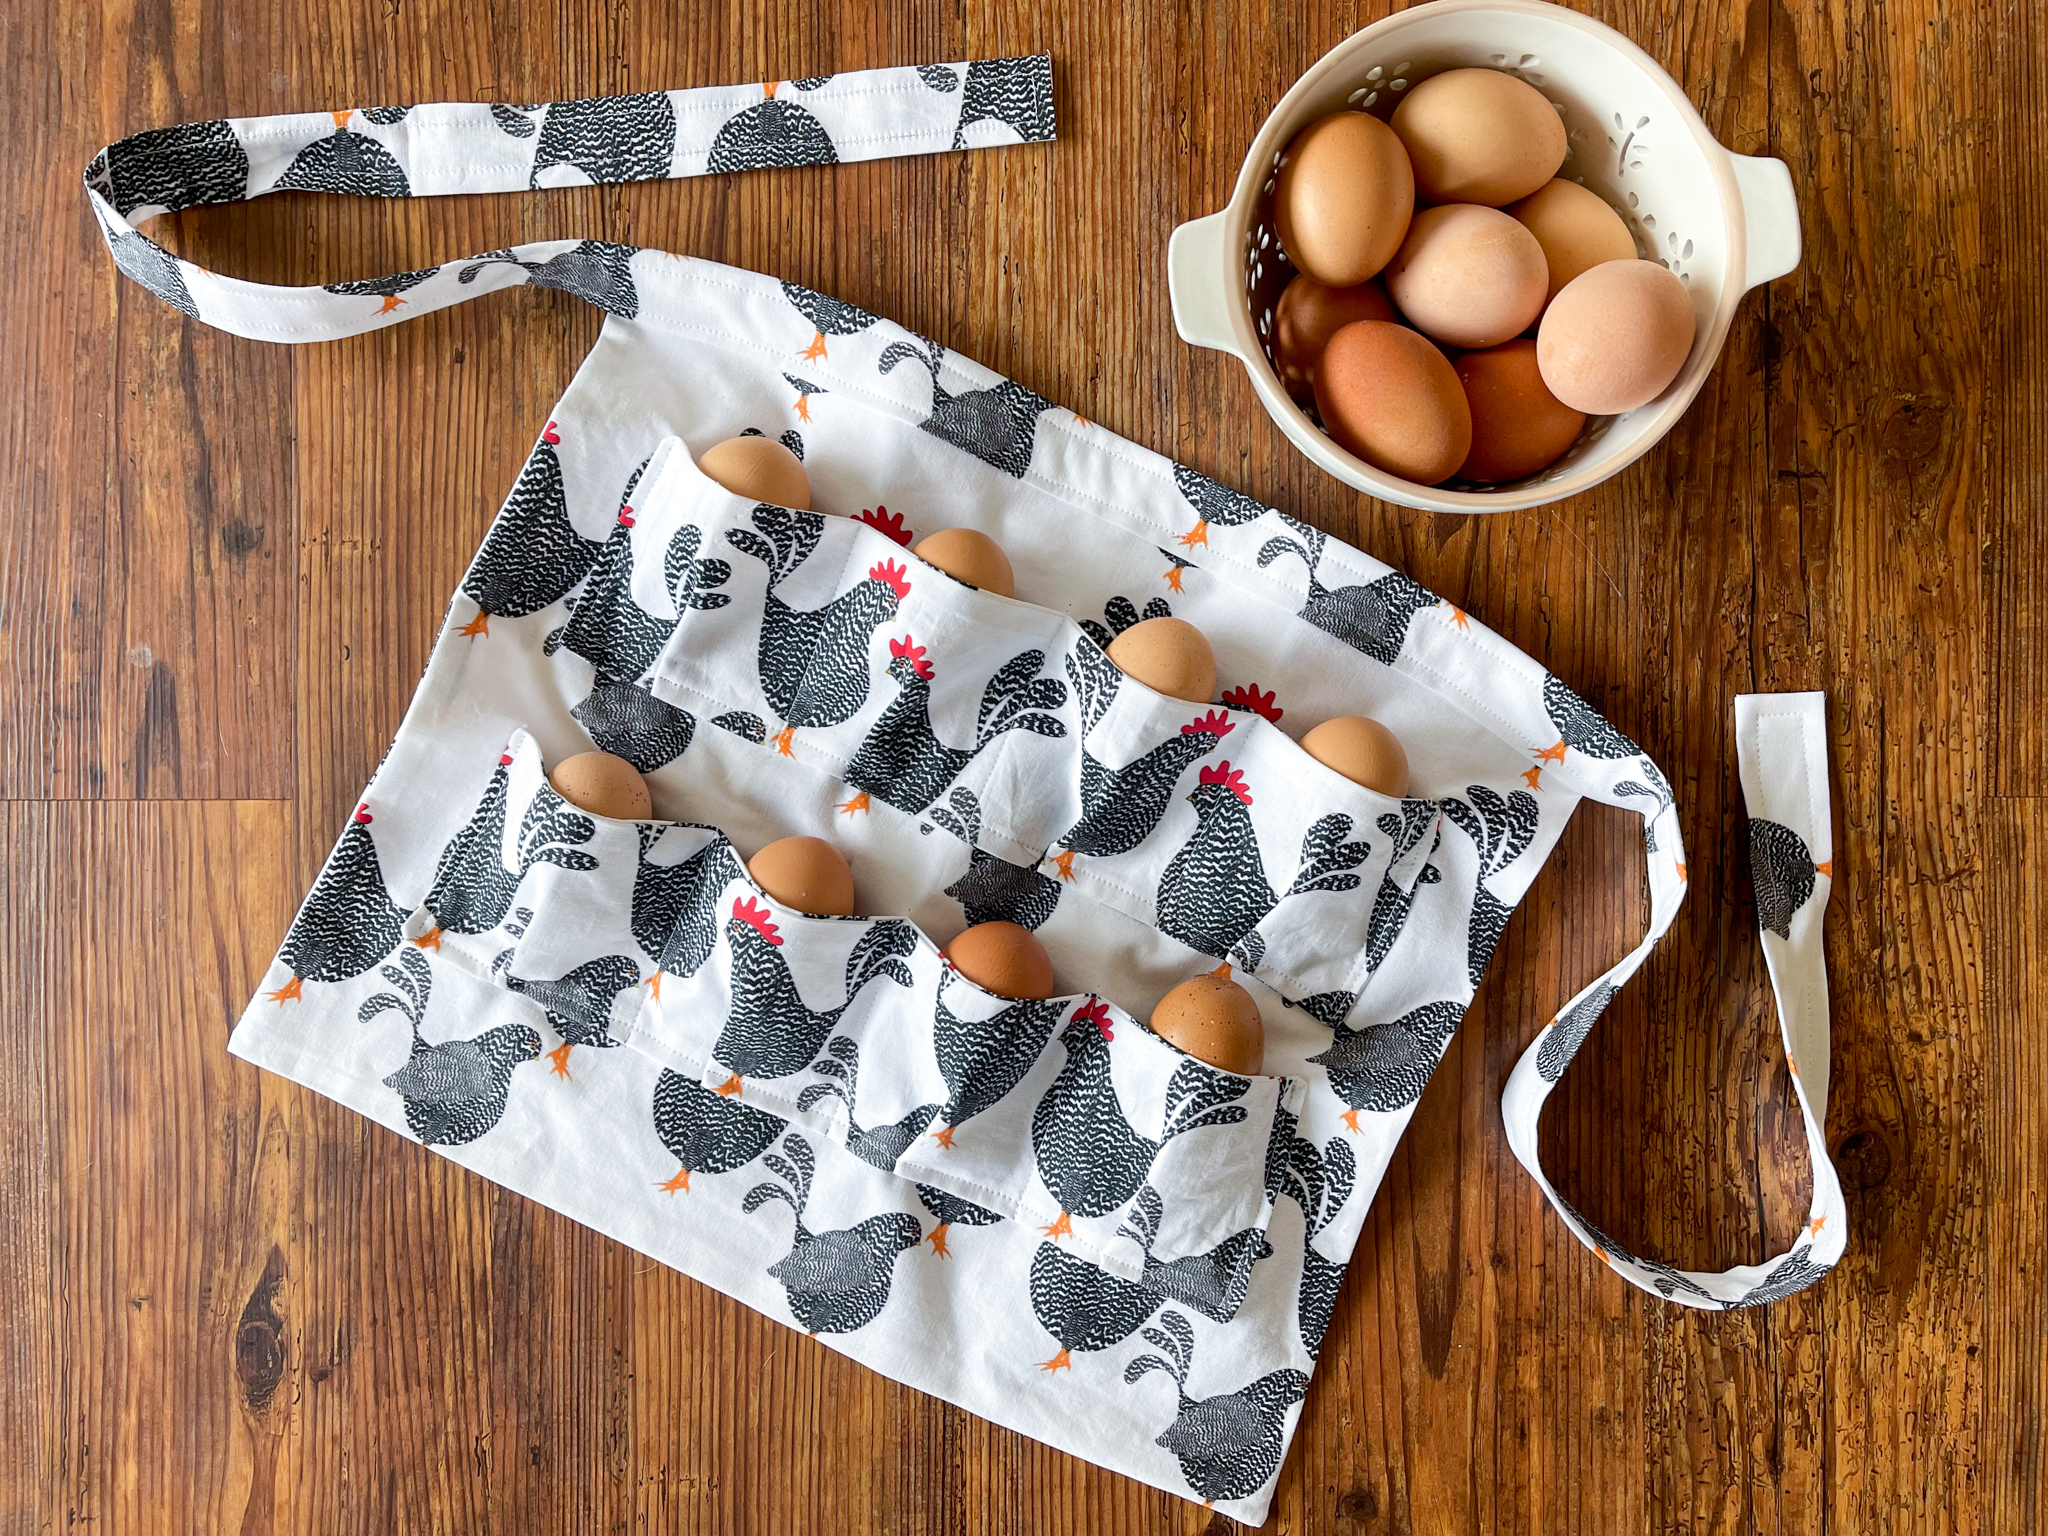 How to Make an Egg Gathering Apron from a Pillowcase - Summers Acres